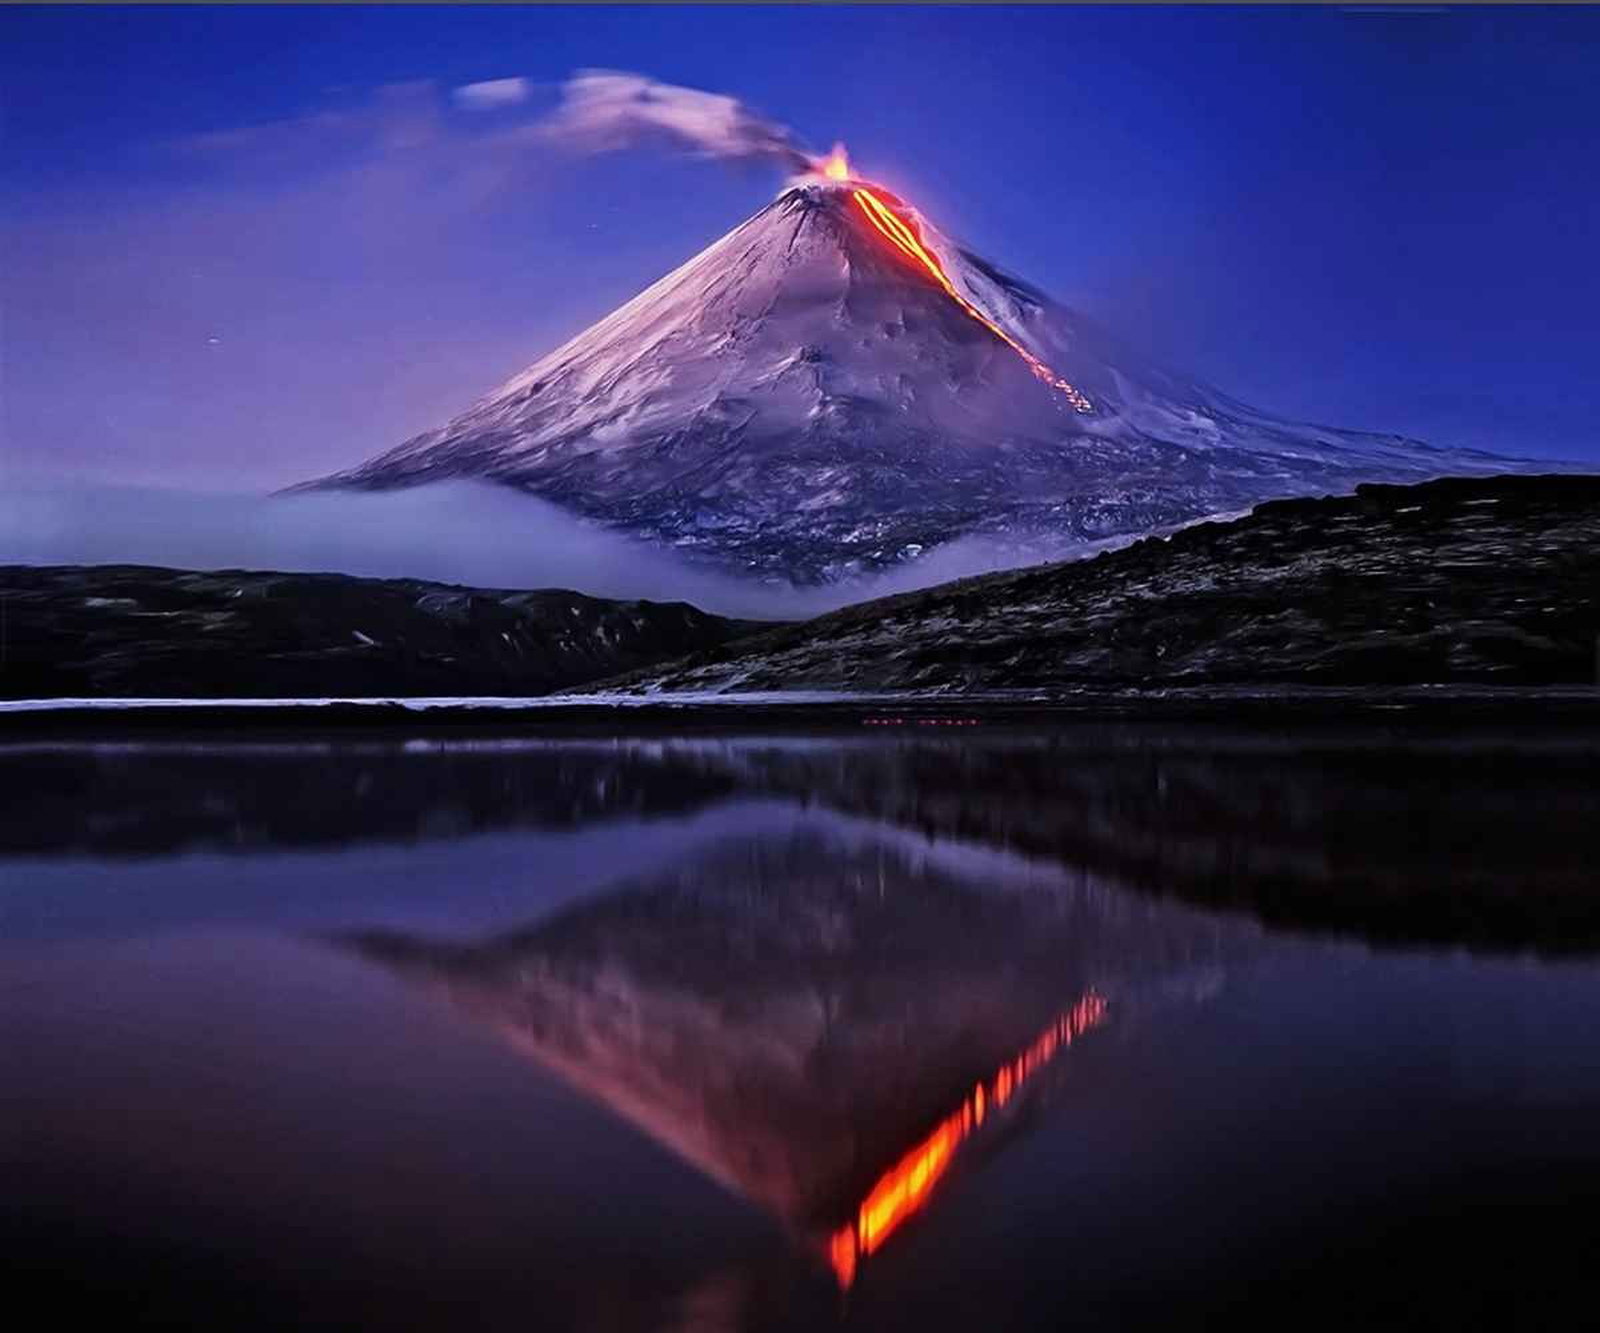 Photo by Firepower with the username @hungrygirls,  January 22, 2014 at 1:02 AM and the text says 'godotal:

Just a Volcano
 #volcano  #lake  #water  #reflections  #blue  #sky  #landscape'